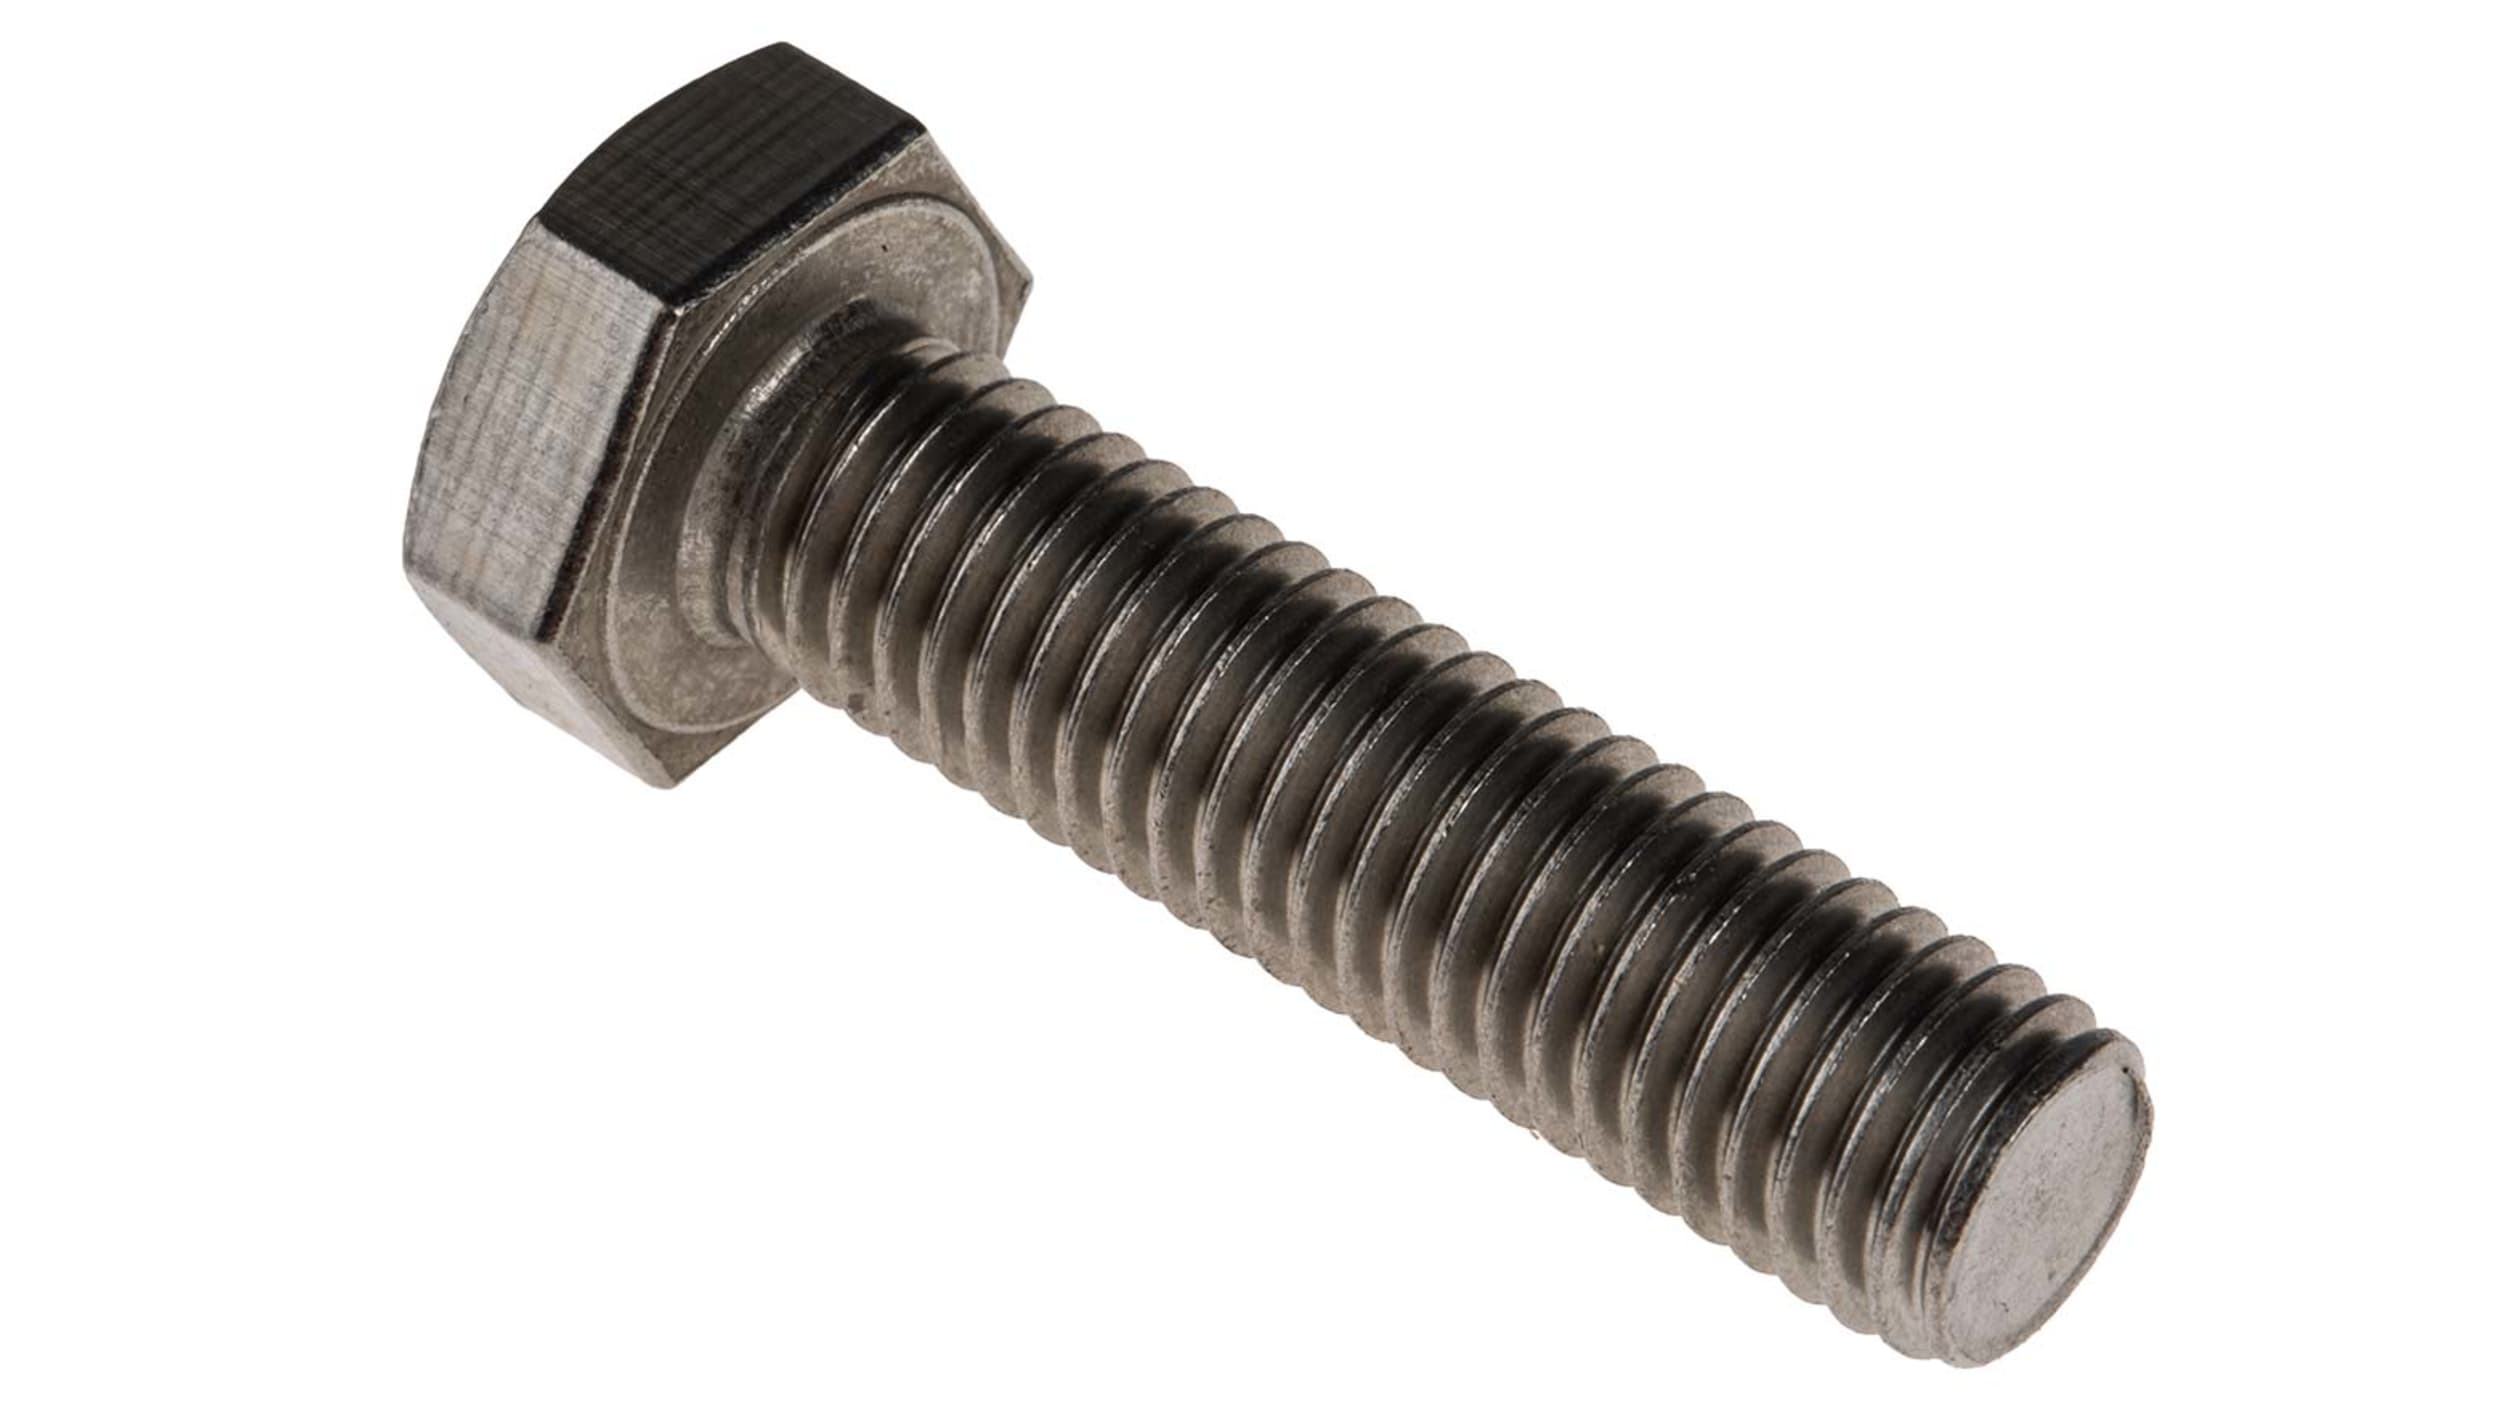 Plain Stainless Steel Hex, Hex Bolt, M10 x 40mm